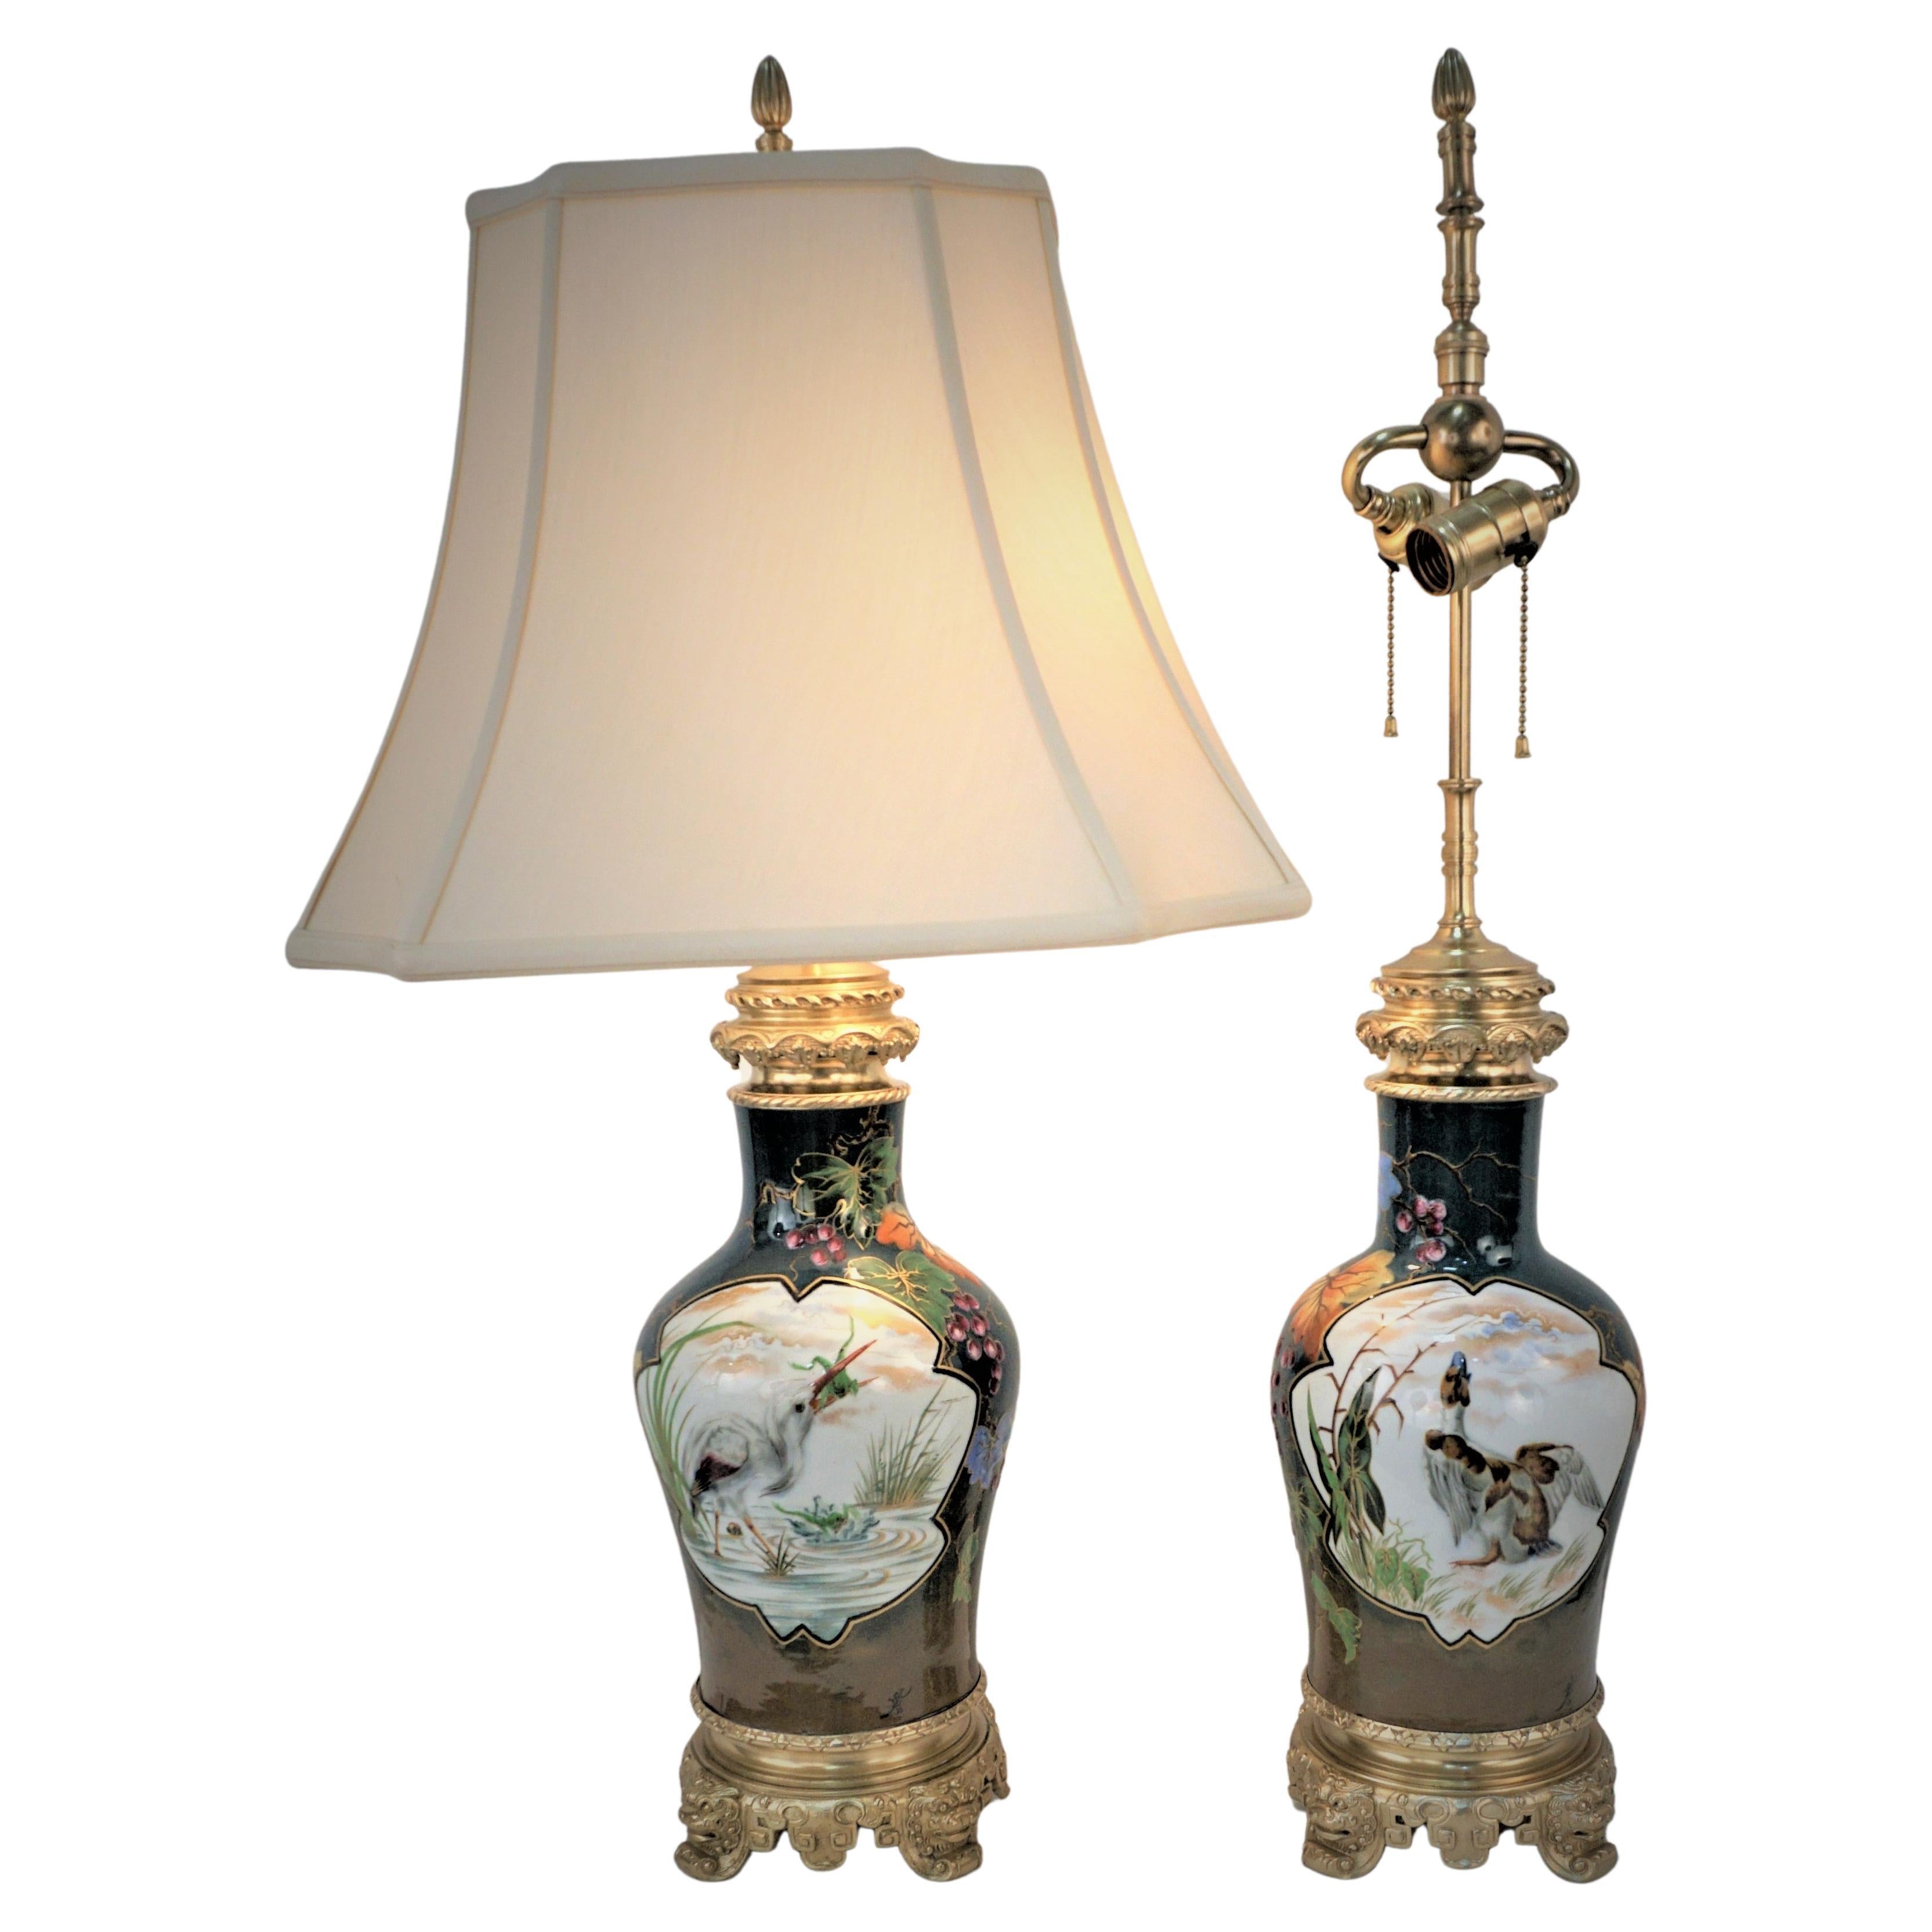 Pair of 19th Century Electrified Porcelain Oil Lamps.